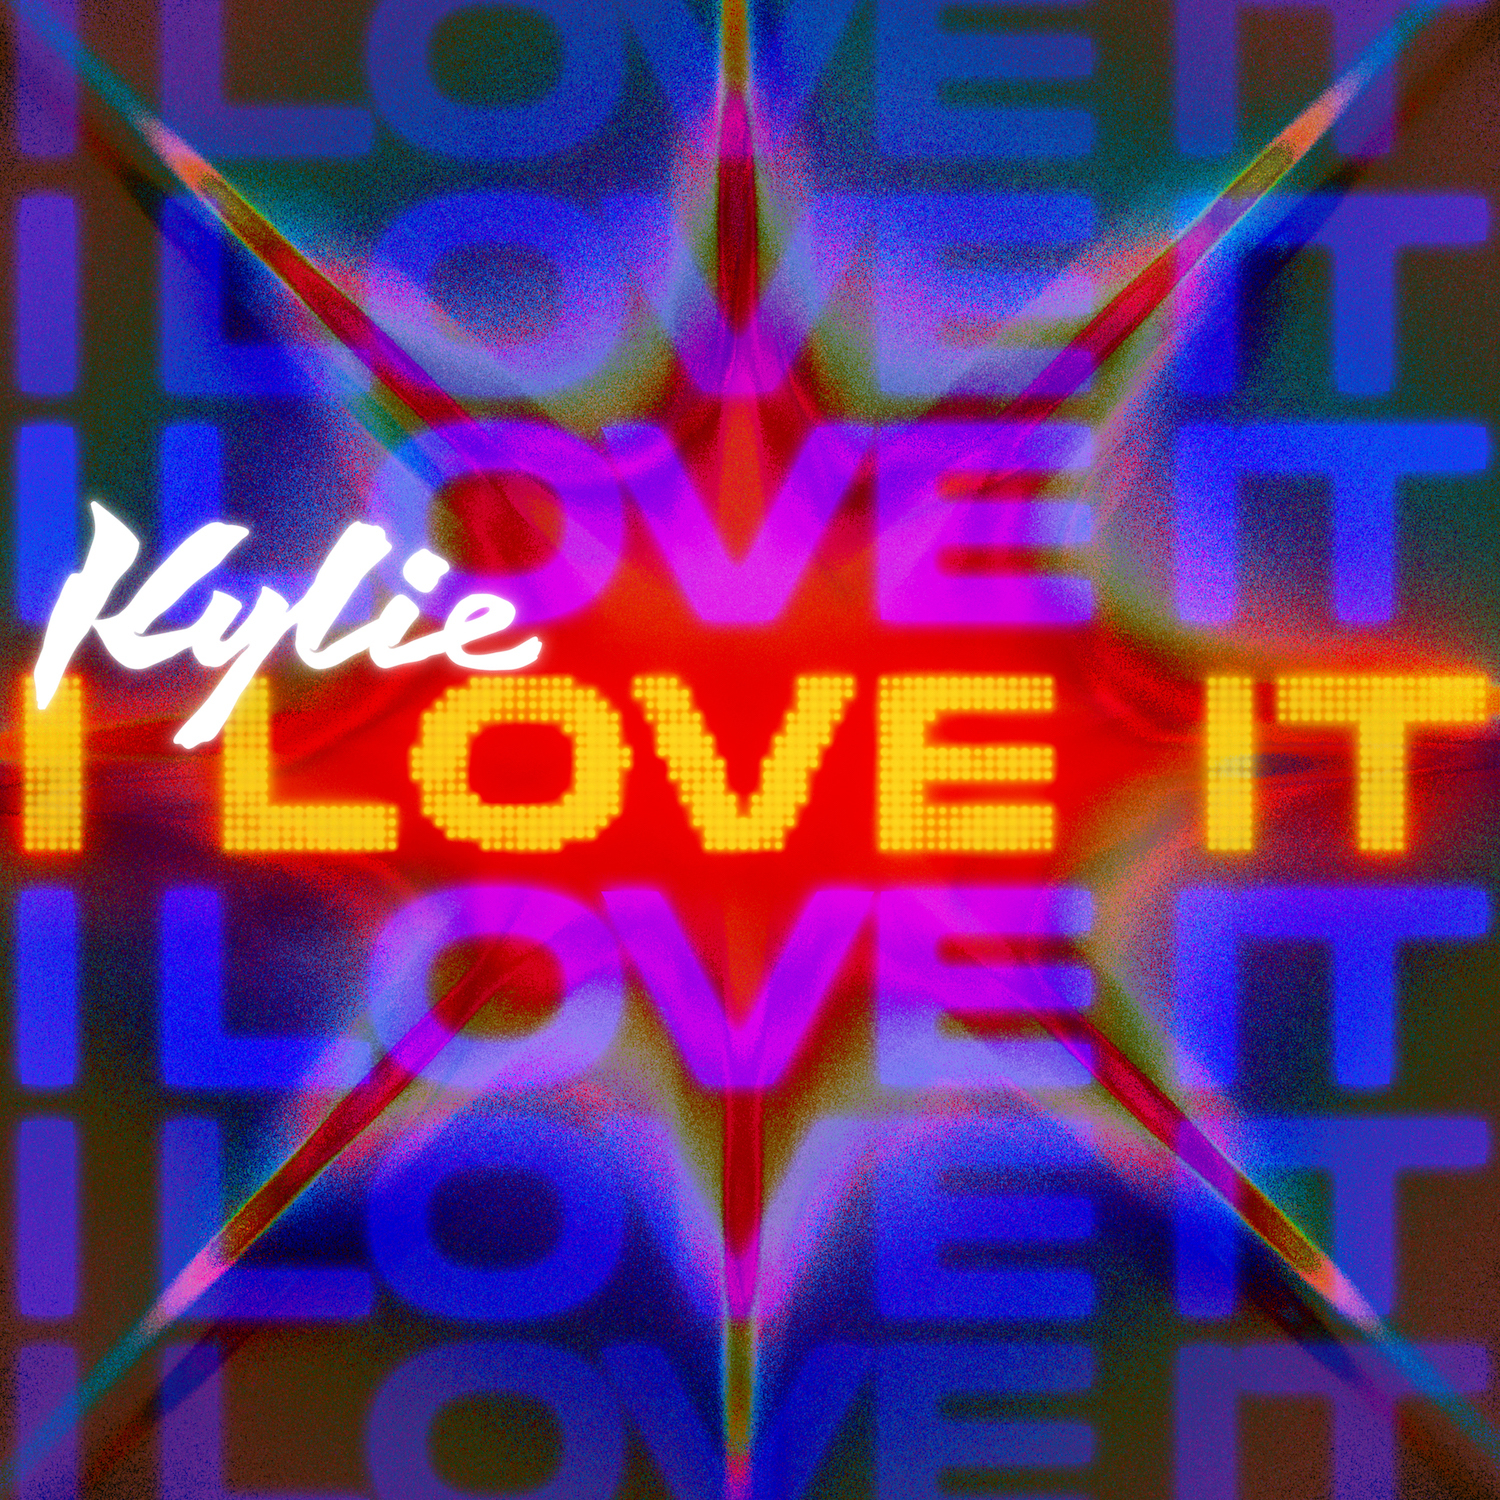 Kylie Minoque Single Cover